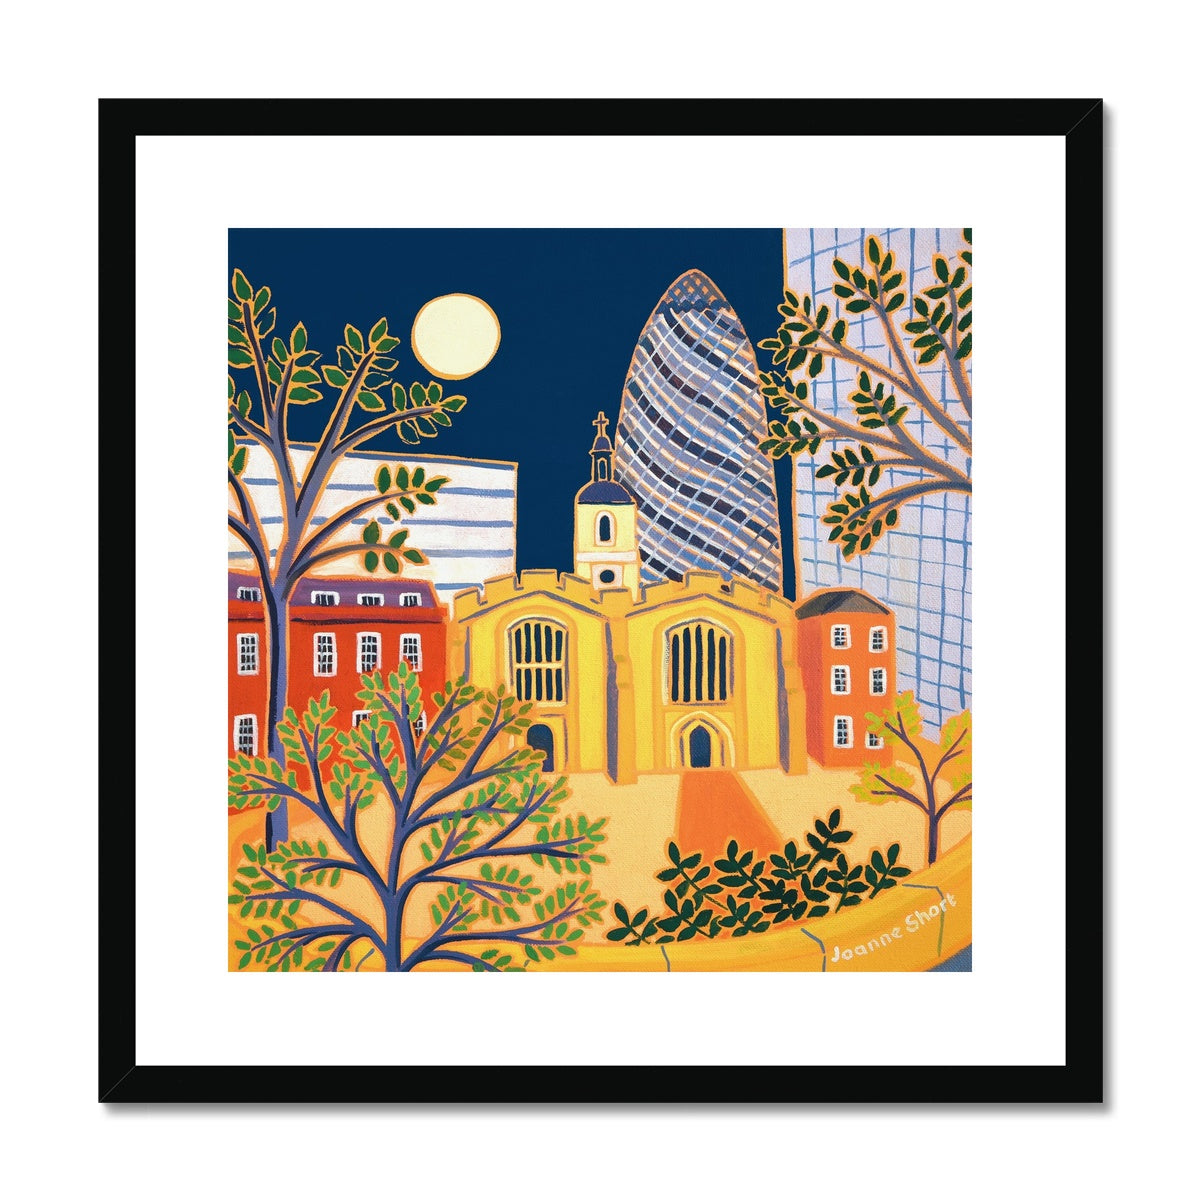 Joanne Short Framed Open Edition London Fine Art Print. &#39;The Old and the New, St Helen&#39;s BishopJoanne Short Framed Open Edition London Fine Art Print. &#39;The Old and the New, St Helen&#39;s Bishopsgate Church &amp; The Gherkin London&#39;.sgate &amp; The Gherkin London&#39;.